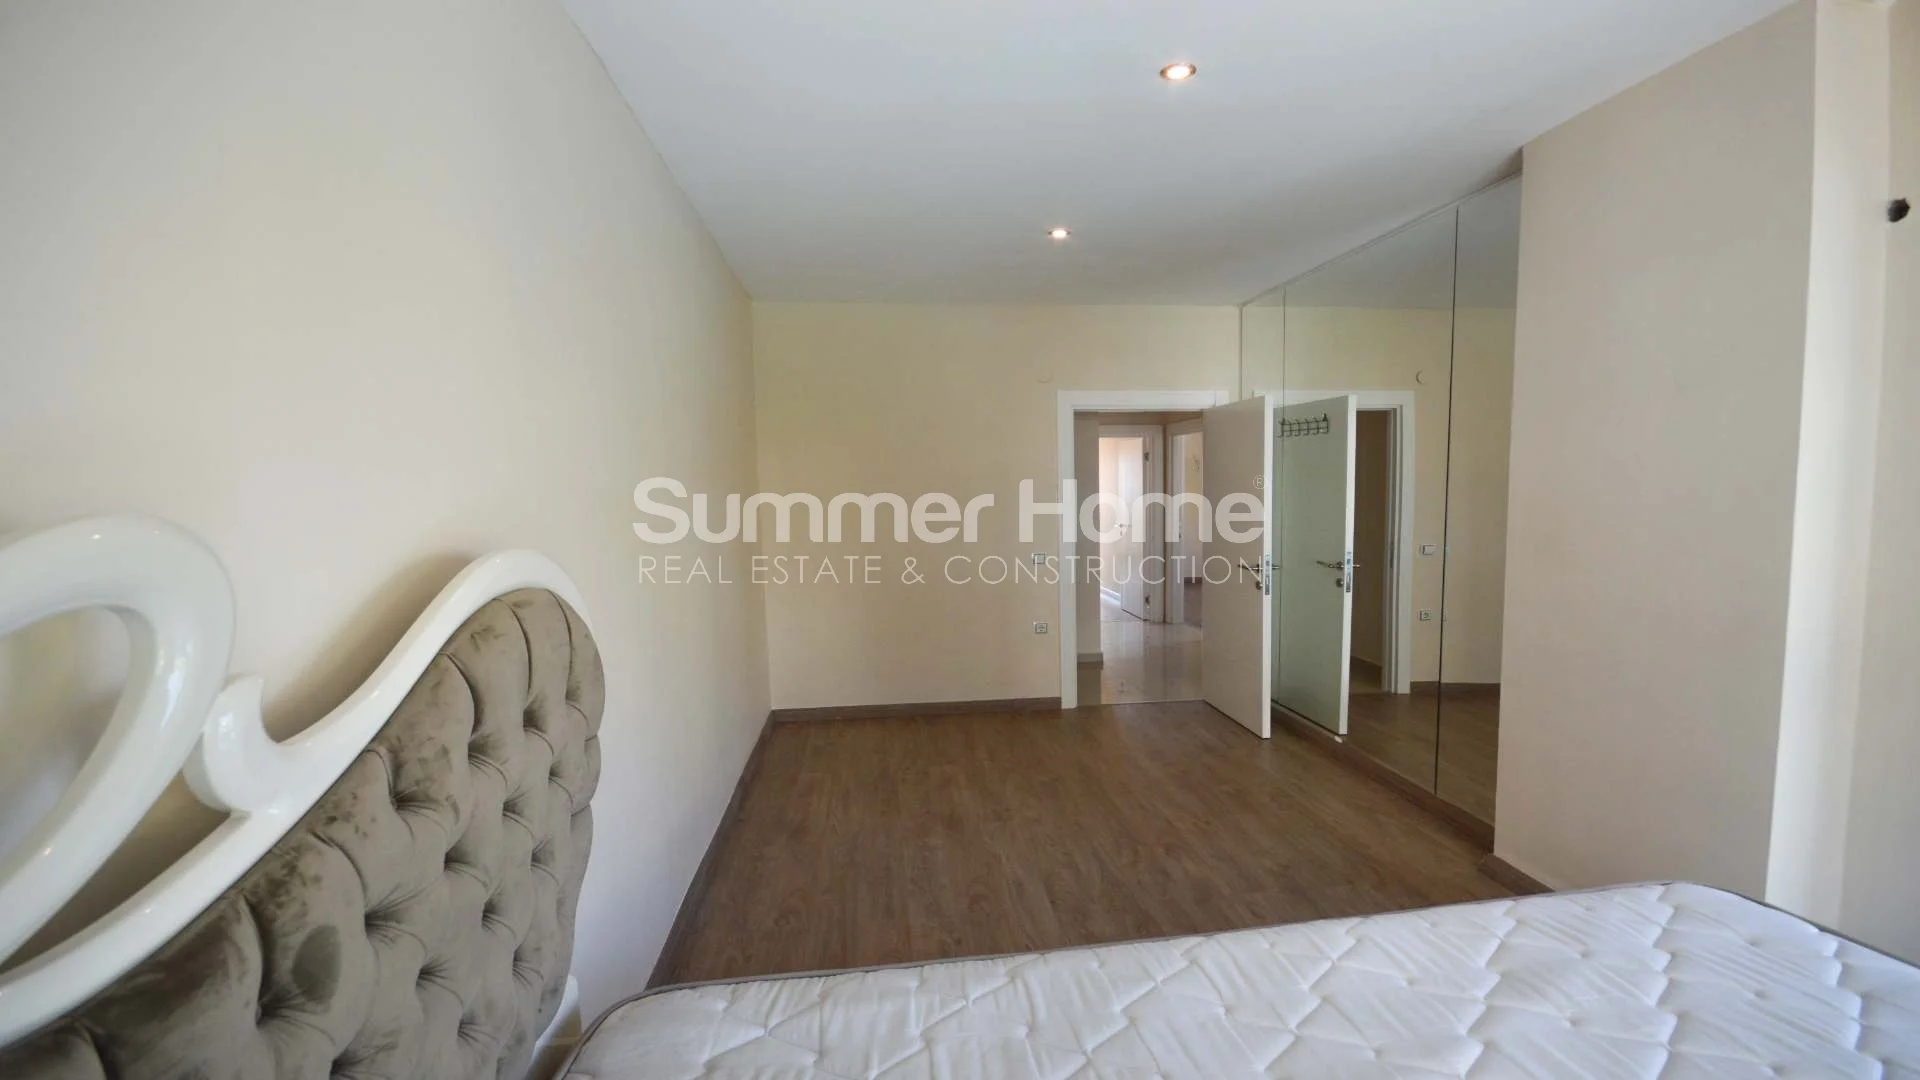 For sale Apartment Alanya Hasbahce Interior - 1